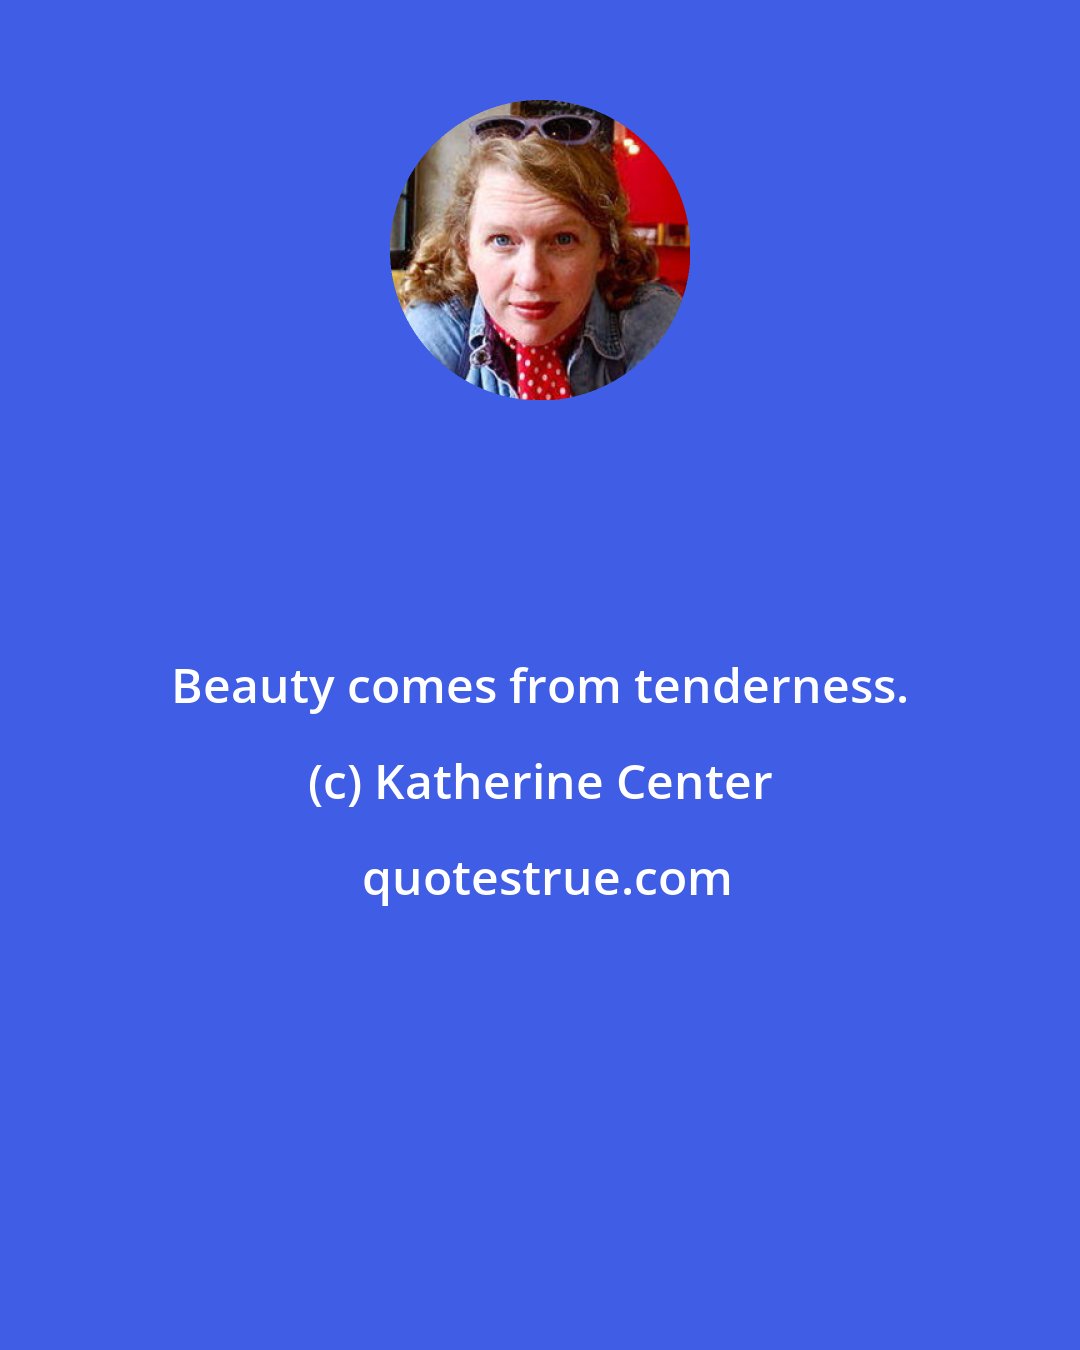 Katherine Center: Beauty comes from tenderness.